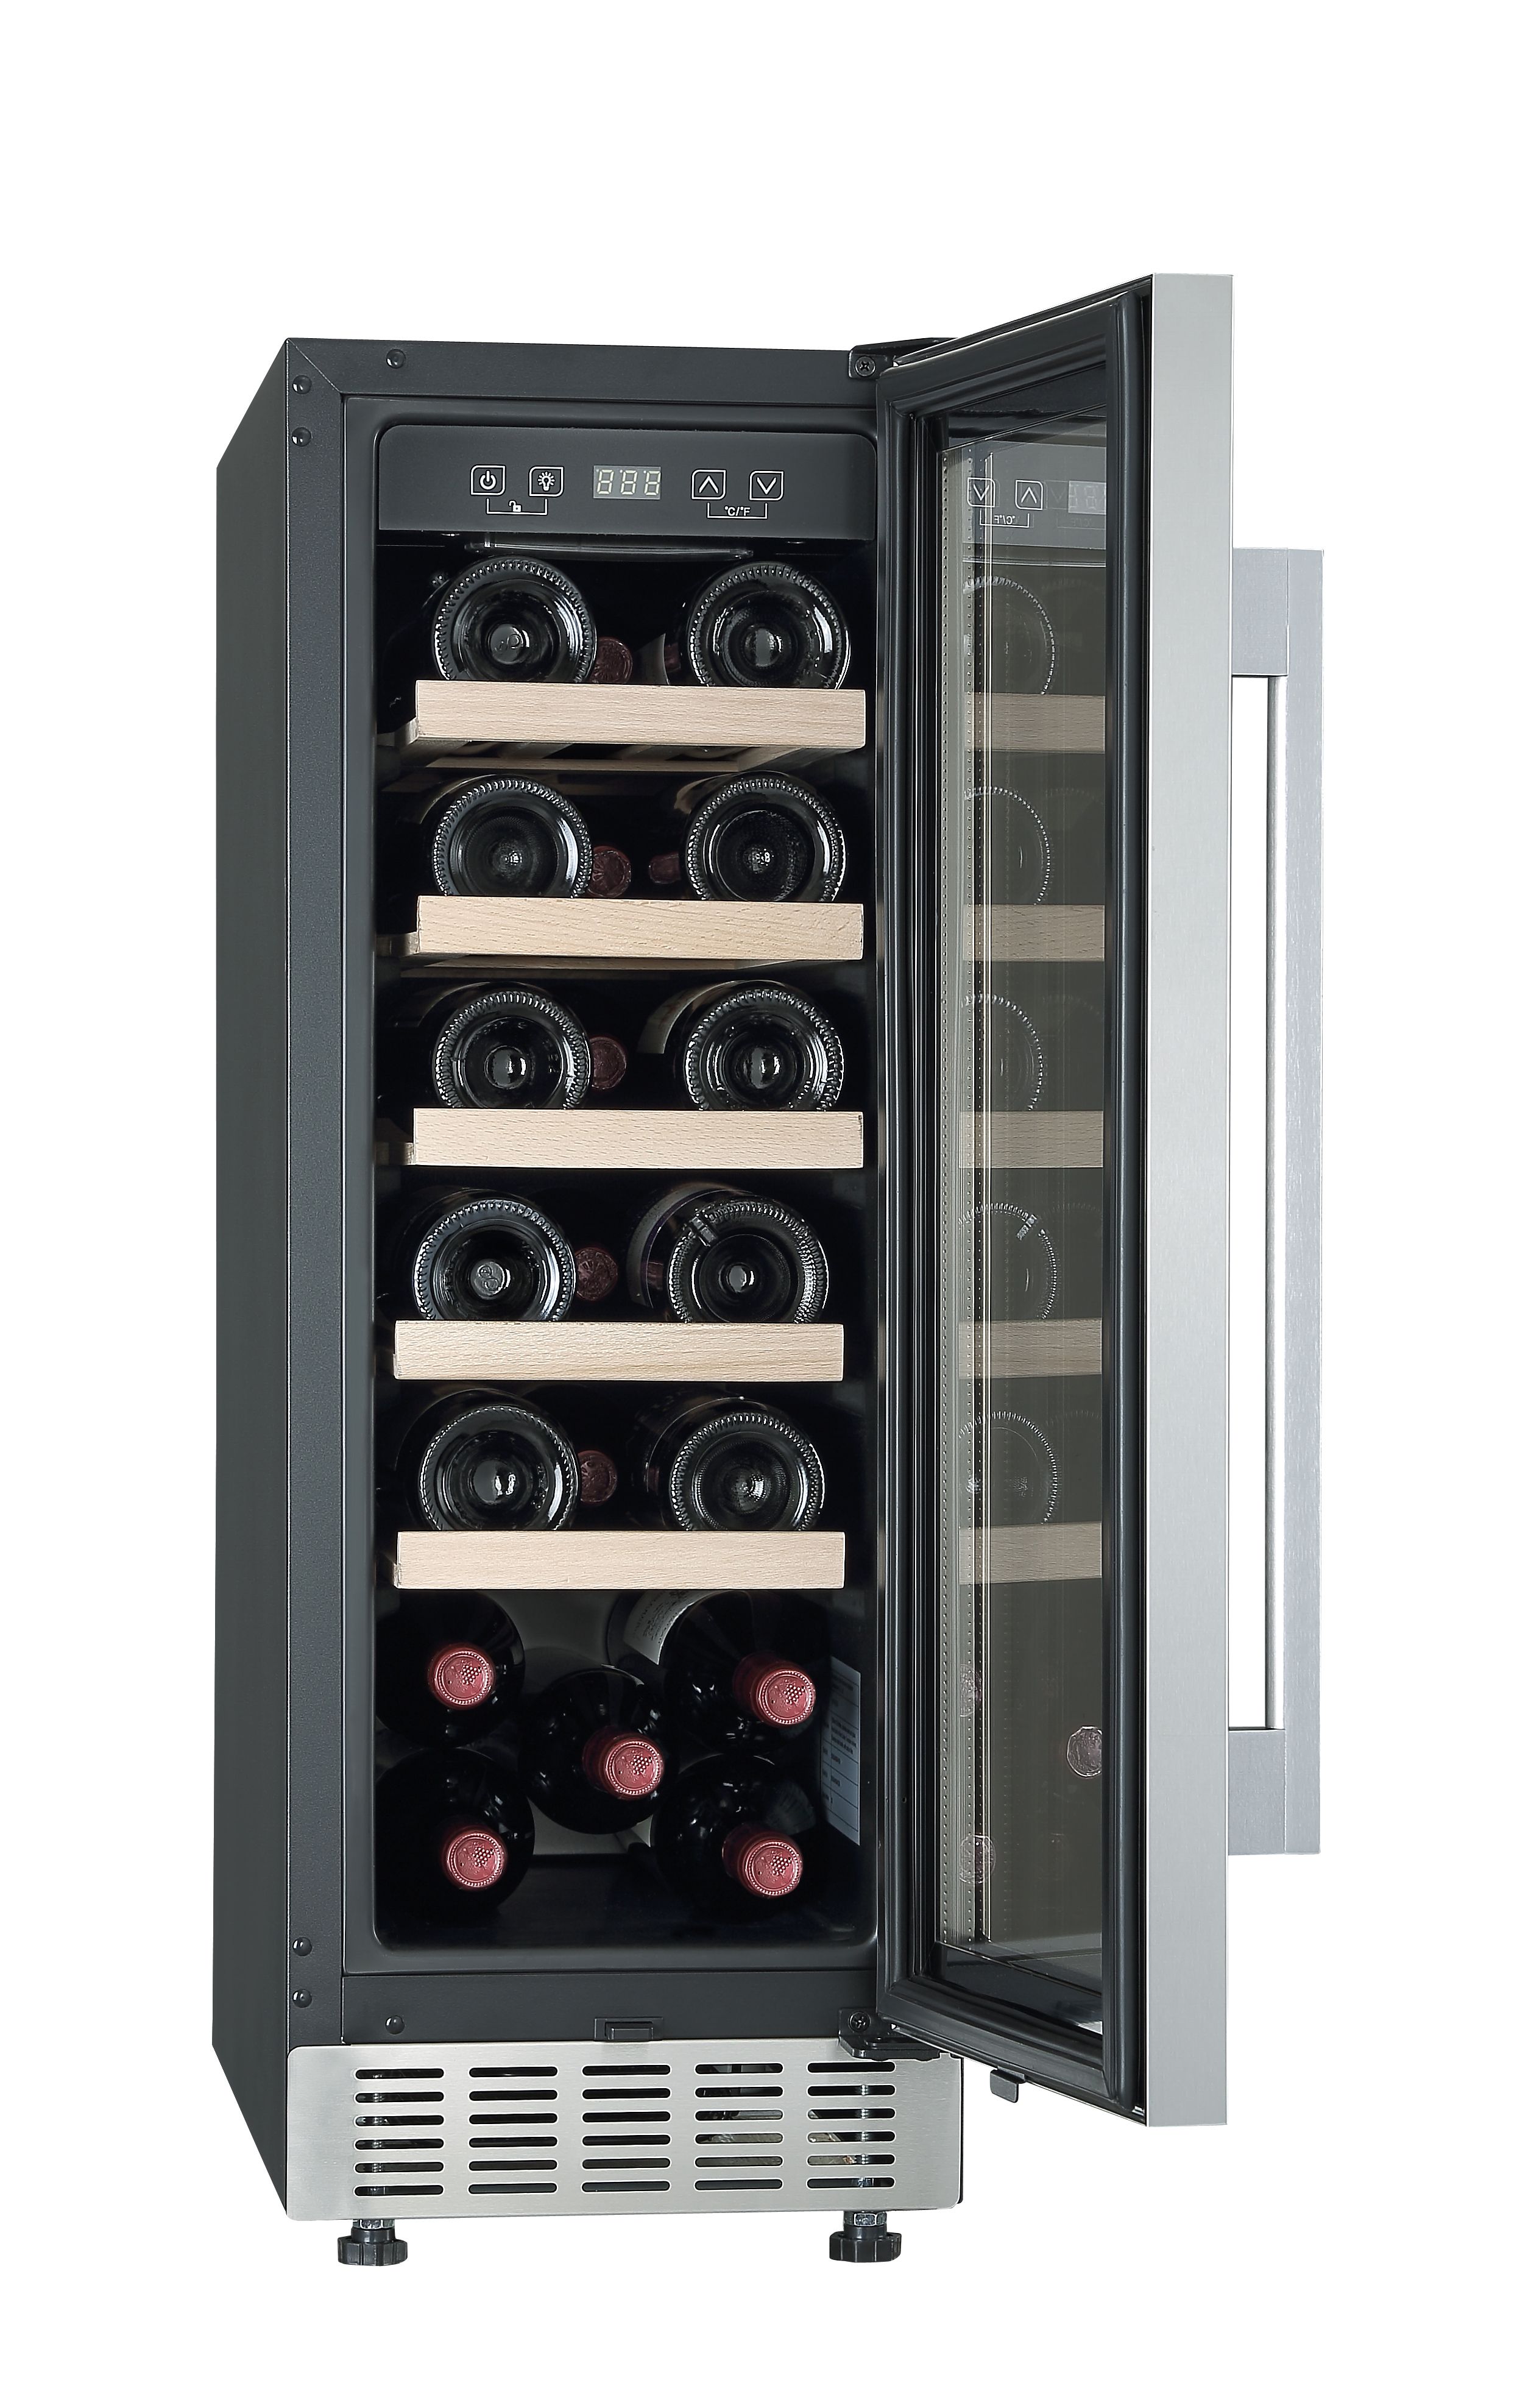 GoodHome BIWCS30UK Built-in & freestanding Wine cooler - Stainless steel effect